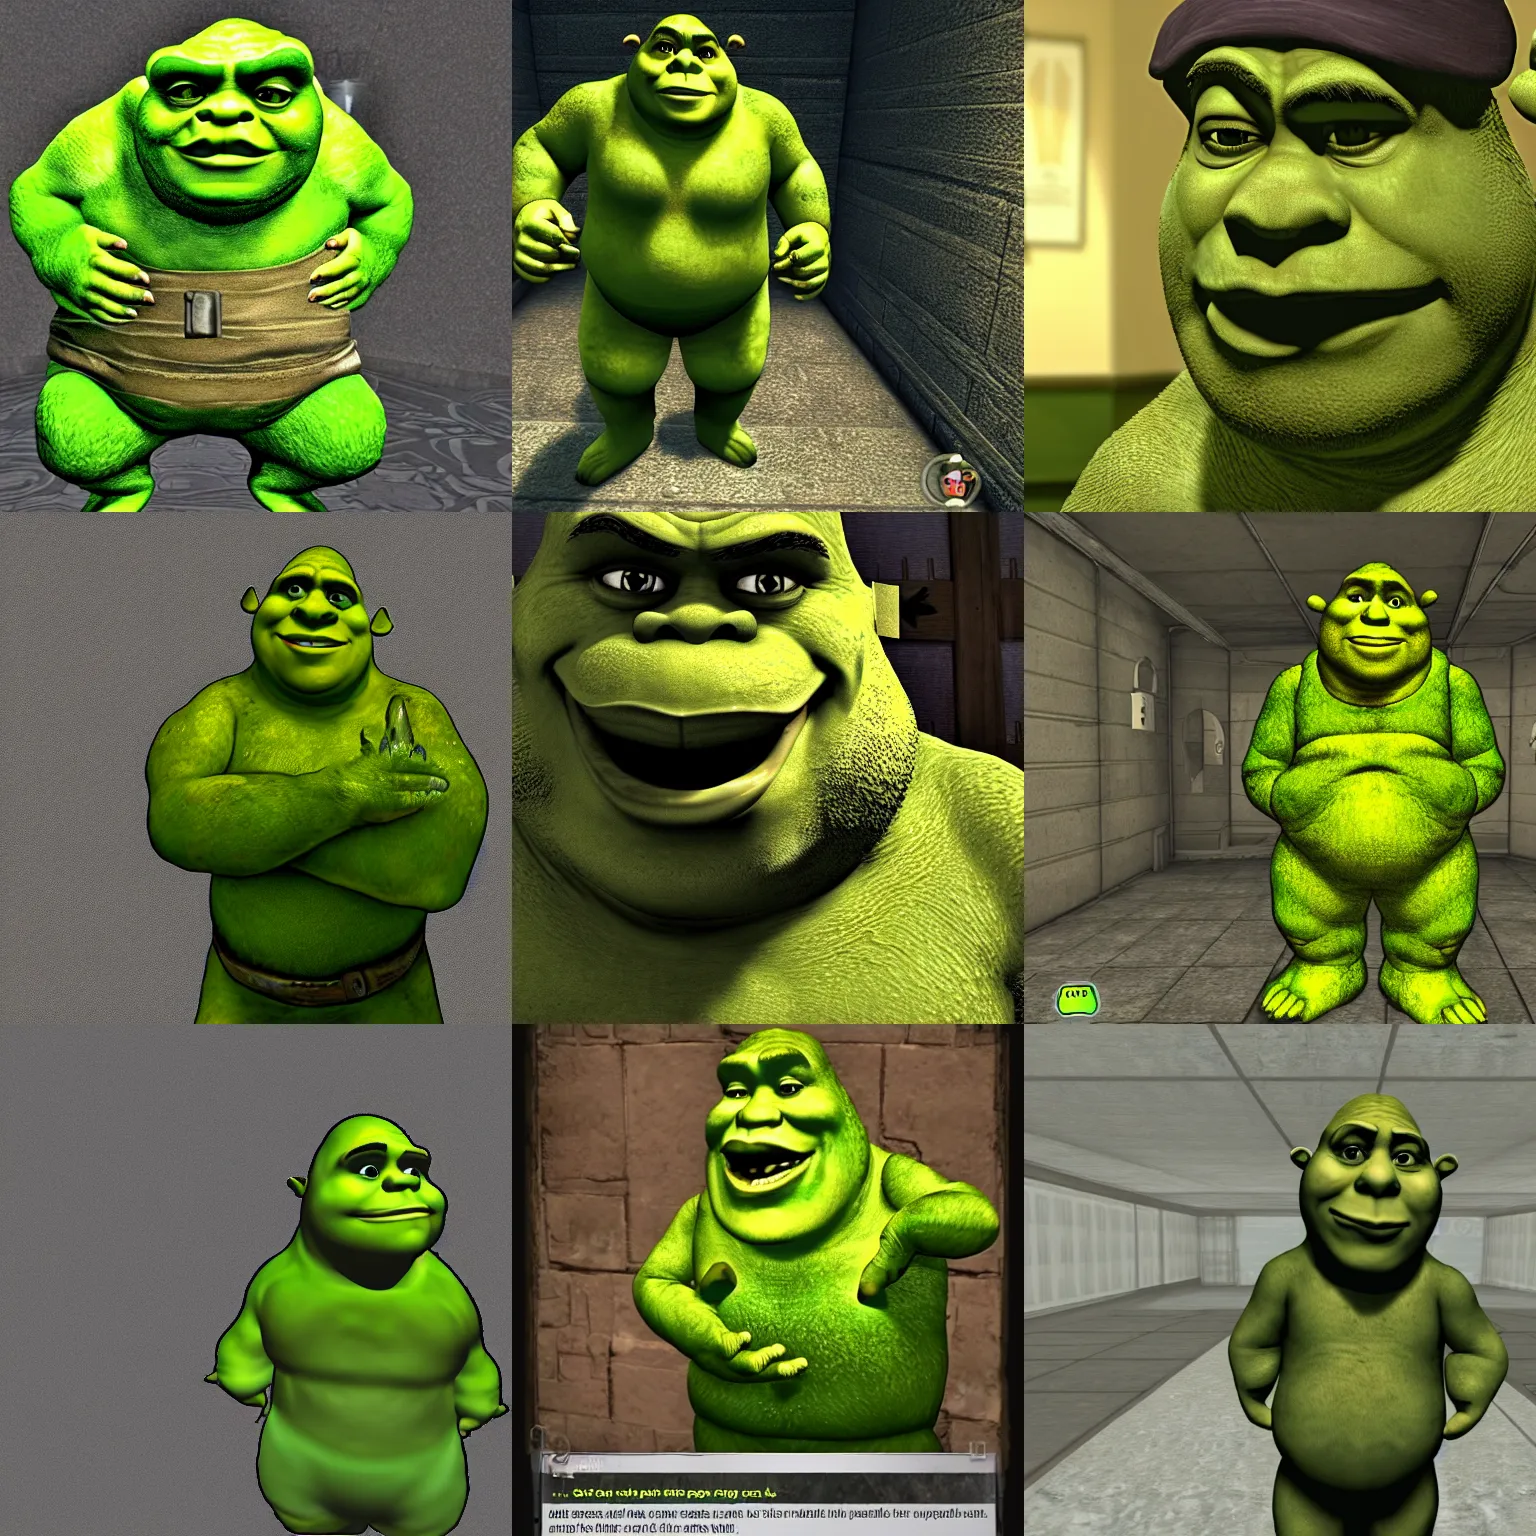 Prompt: SCP screenshot ofshrek as a experiment by the SCP Foundation